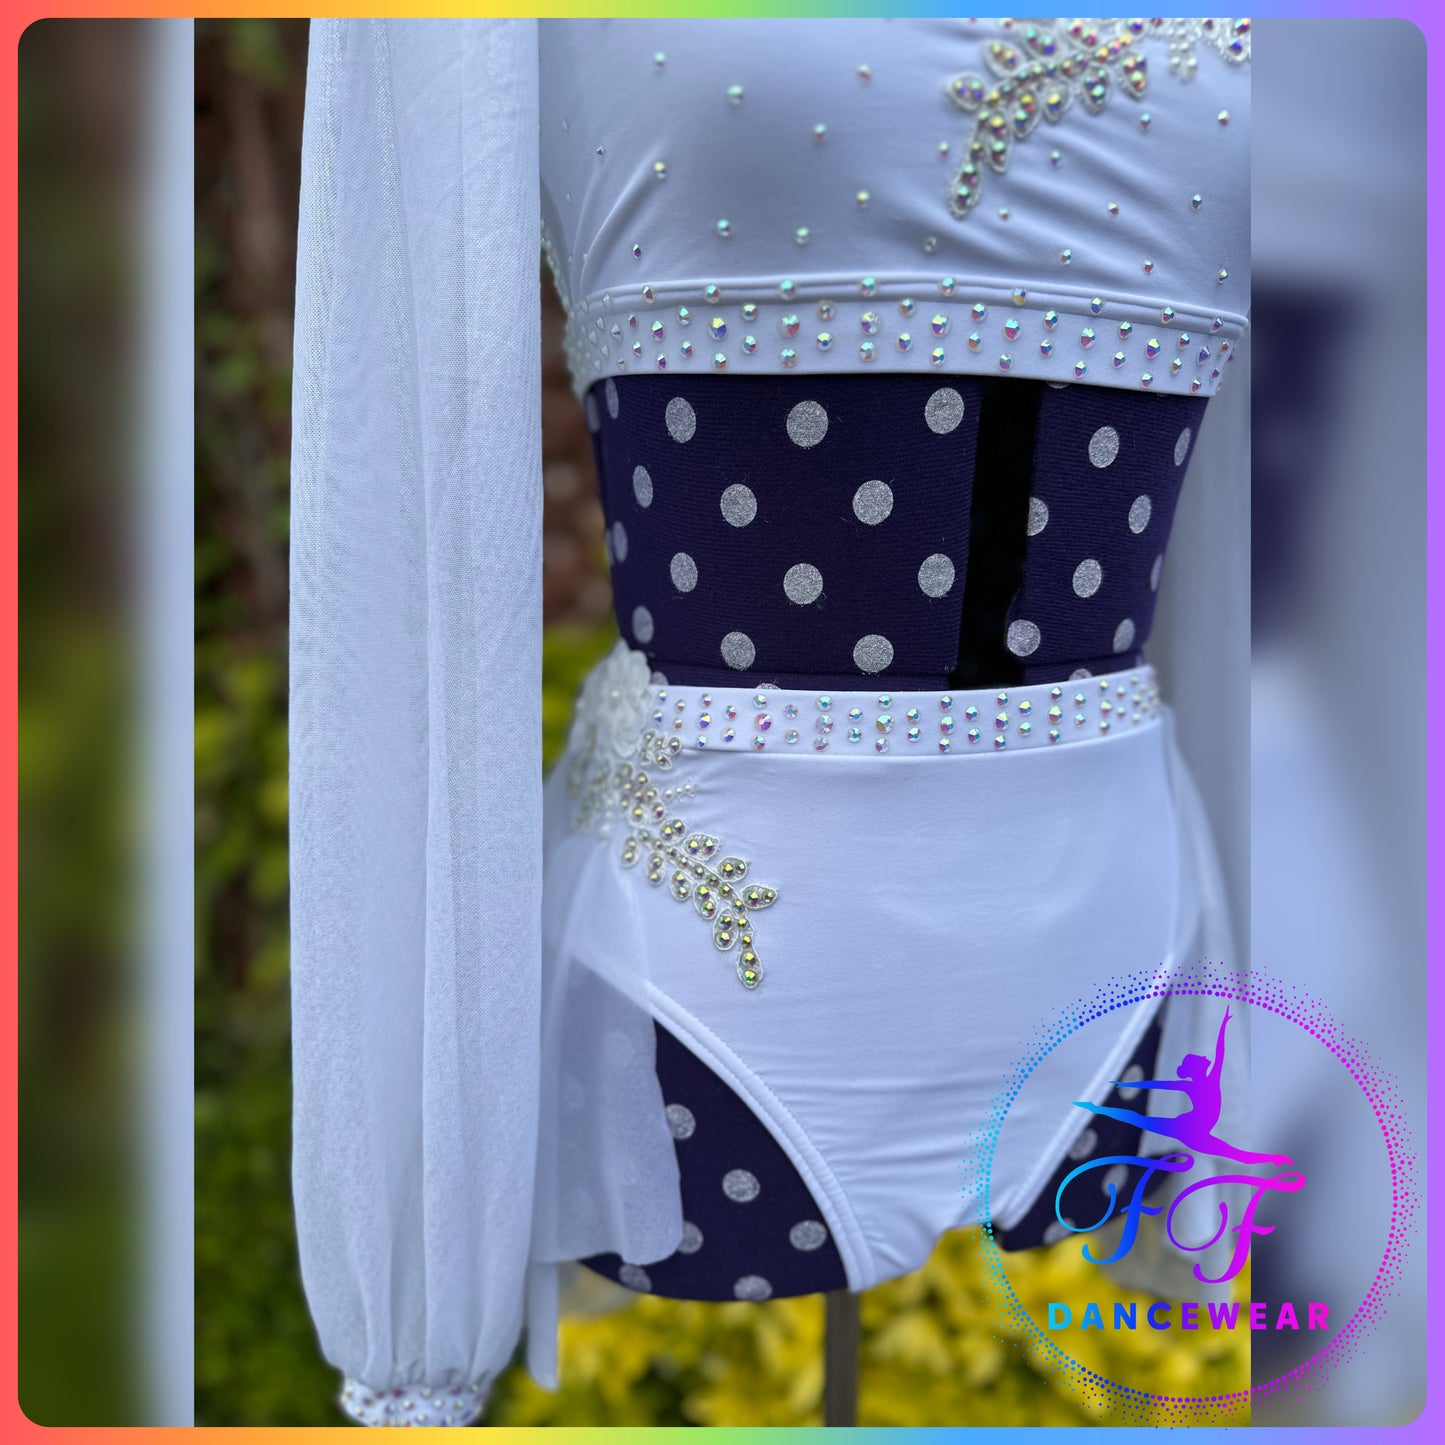 BESPOKE White Stoned Two Piece Lyrical / Contemporary Dance Costume (Adult S)